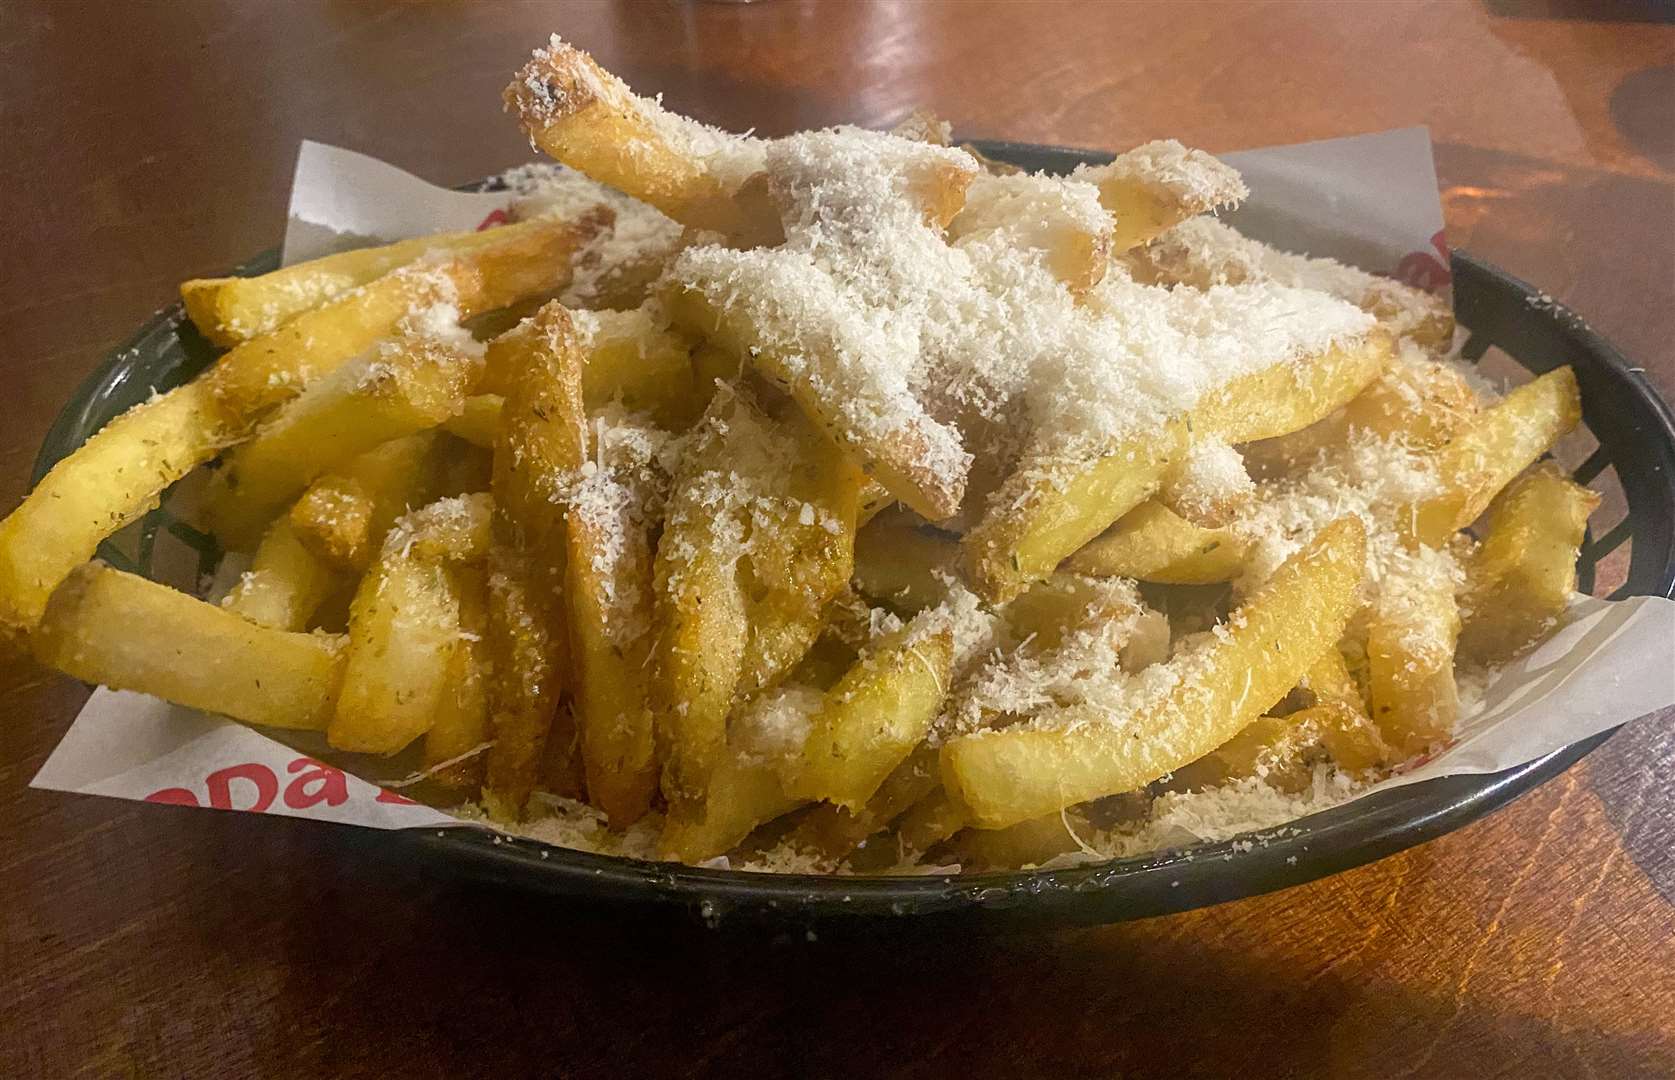 We probably didn’t need the parmesan fries on top of everything else, but they tasted delicious